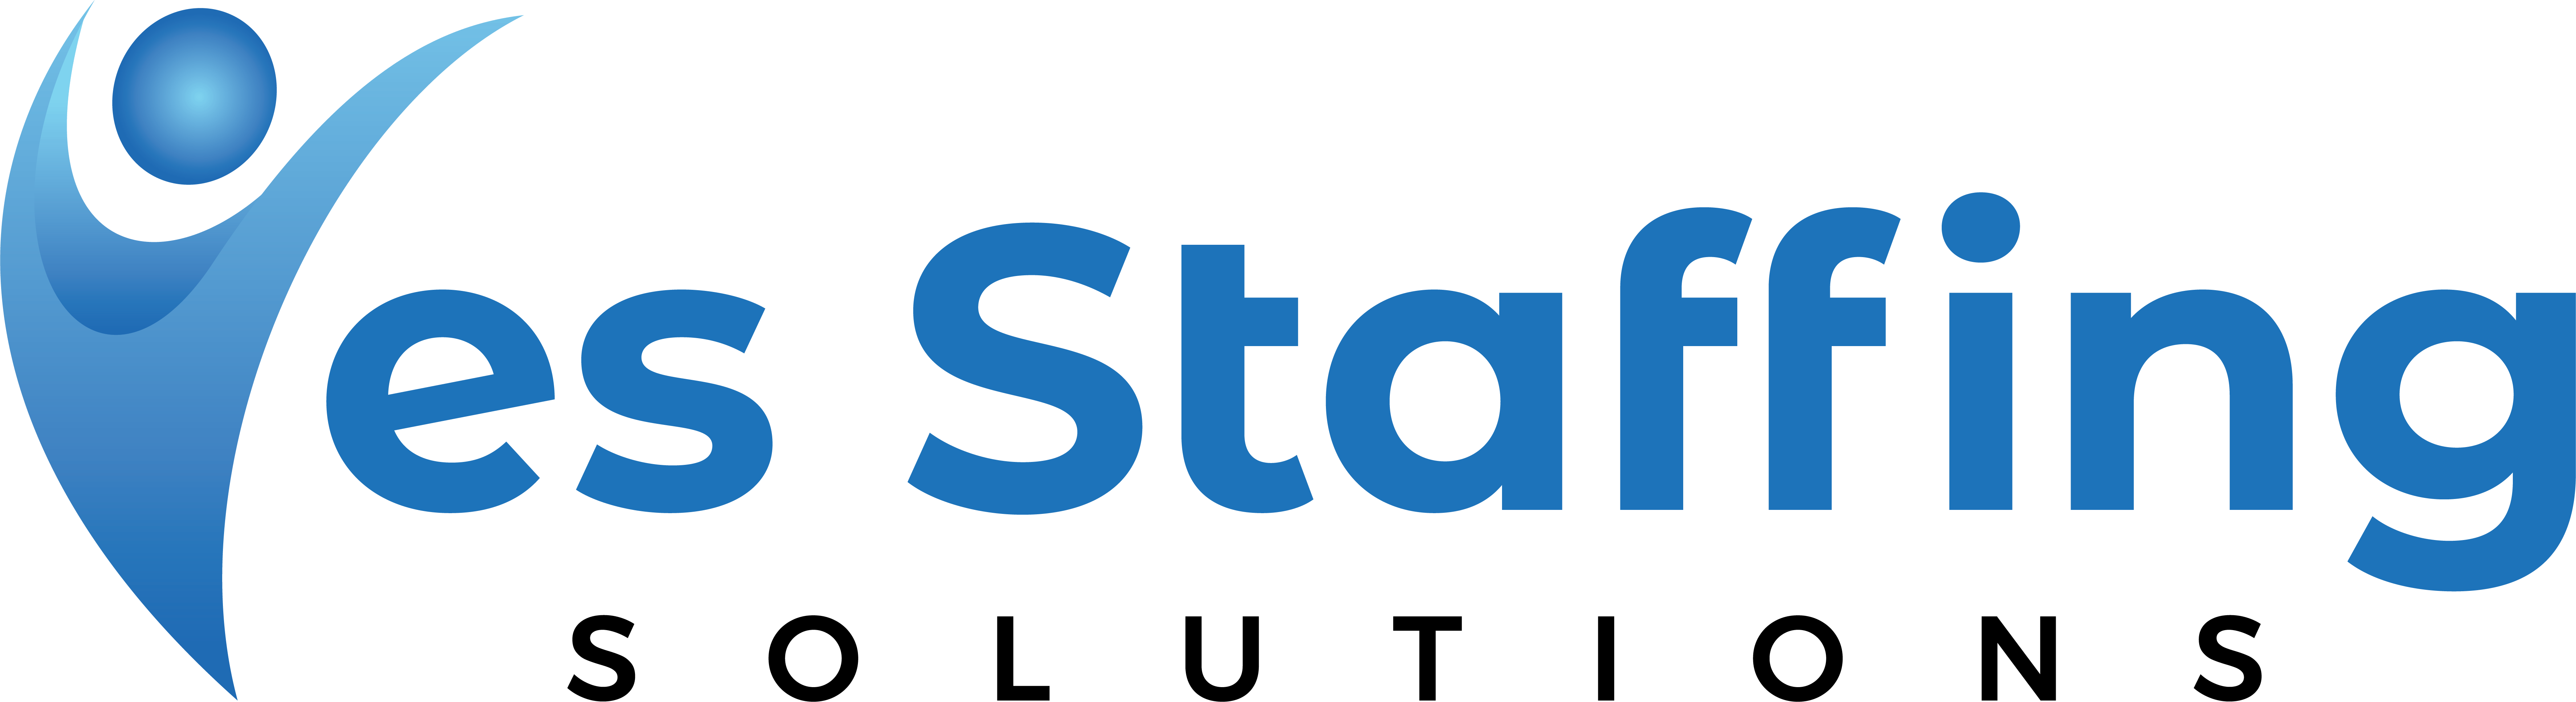 Yes Staffing Solutions